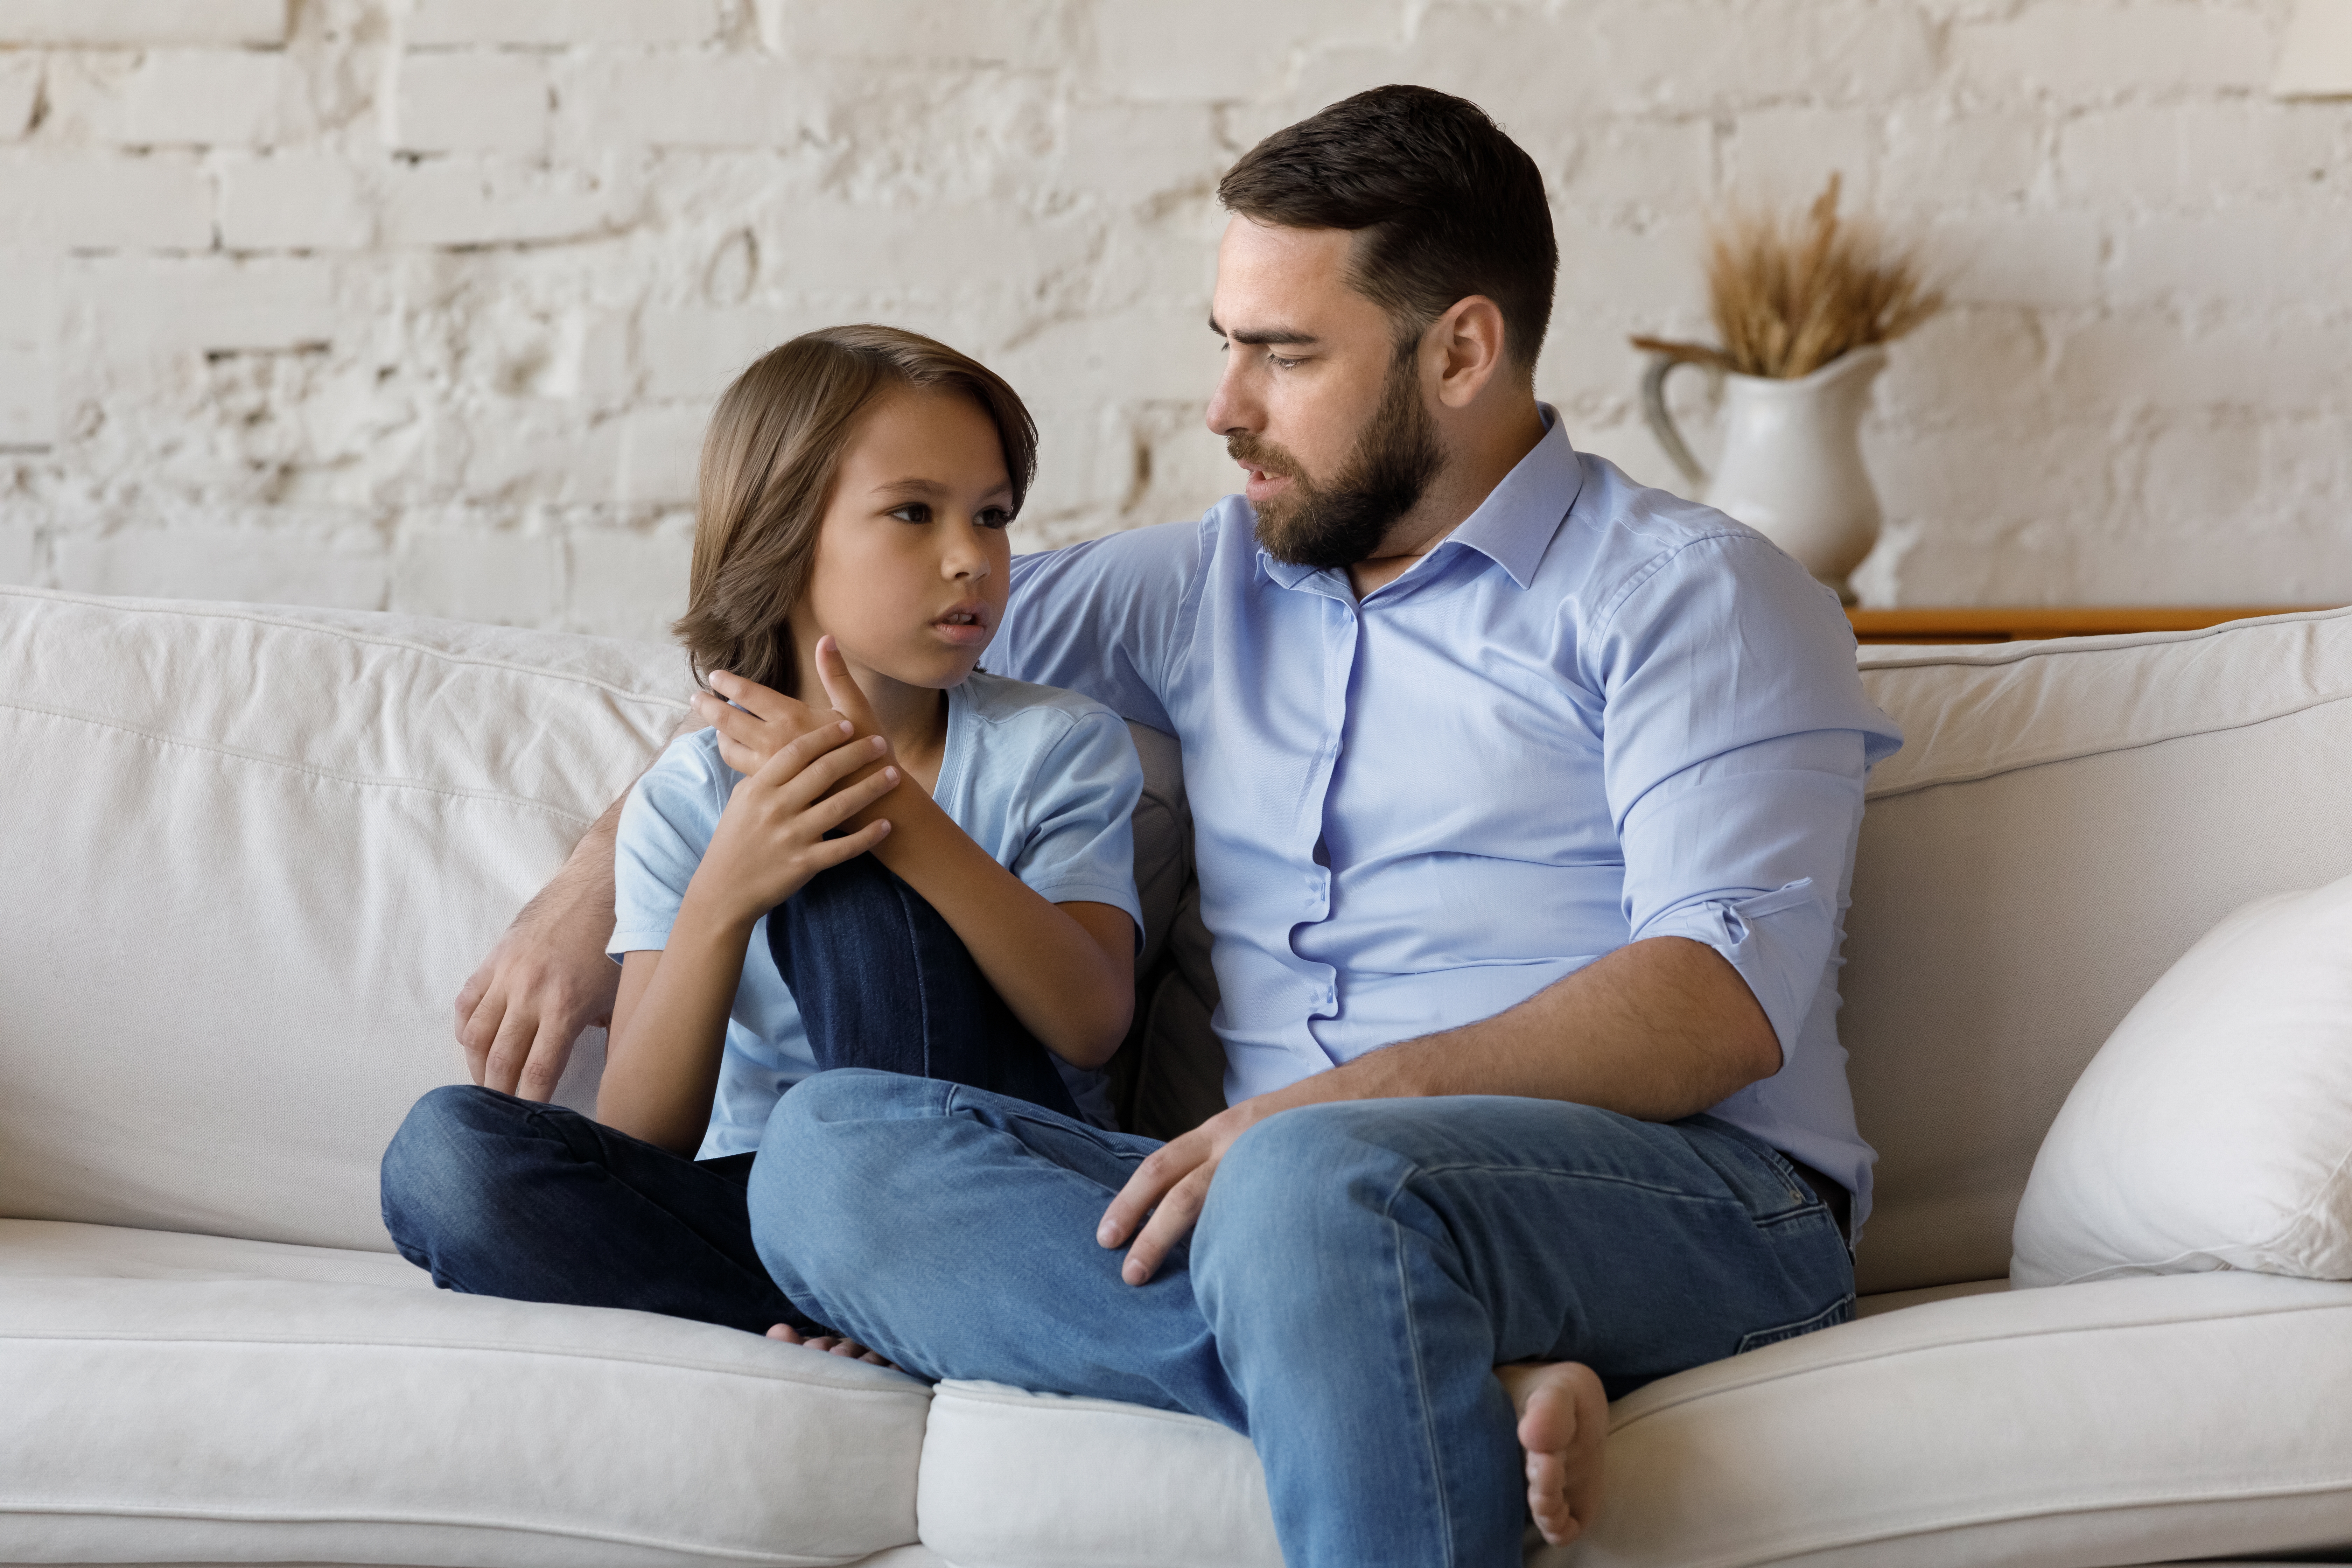 A serious father listens to his pre-teen son while sitting on a sofa at home | Source: Shutterstock